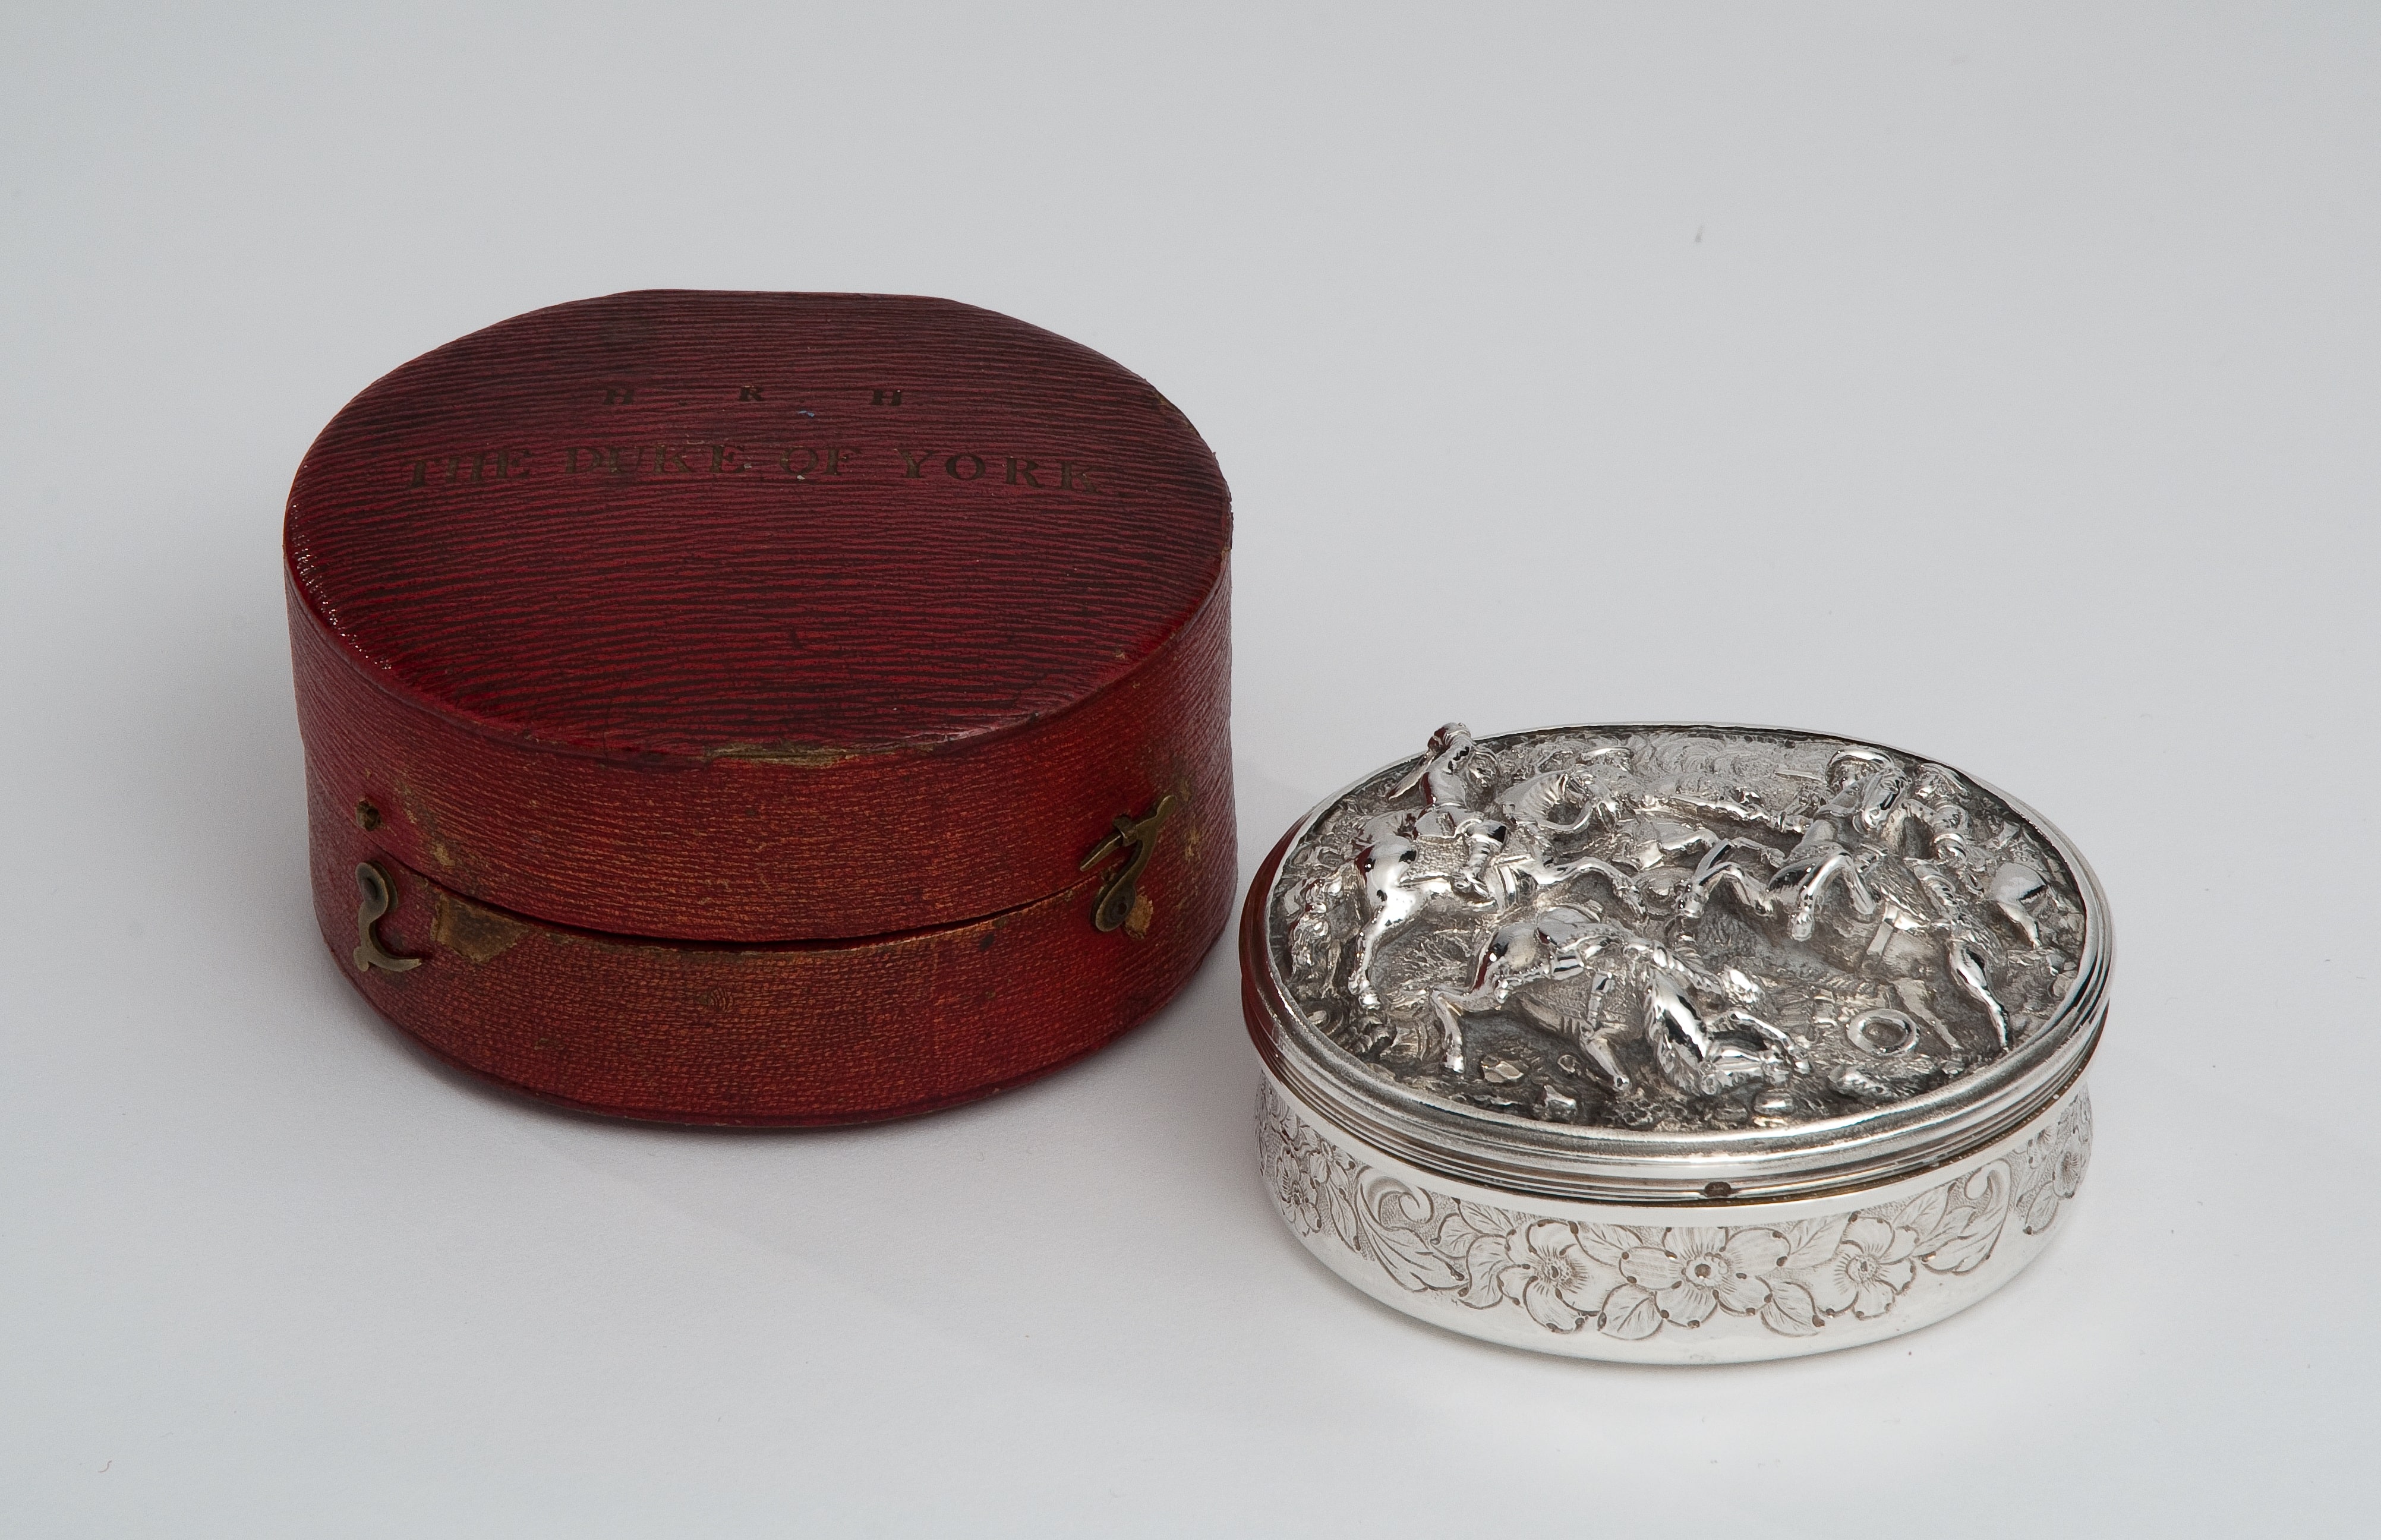 Silver circular box with engraved design on top, with red leather circular case to left